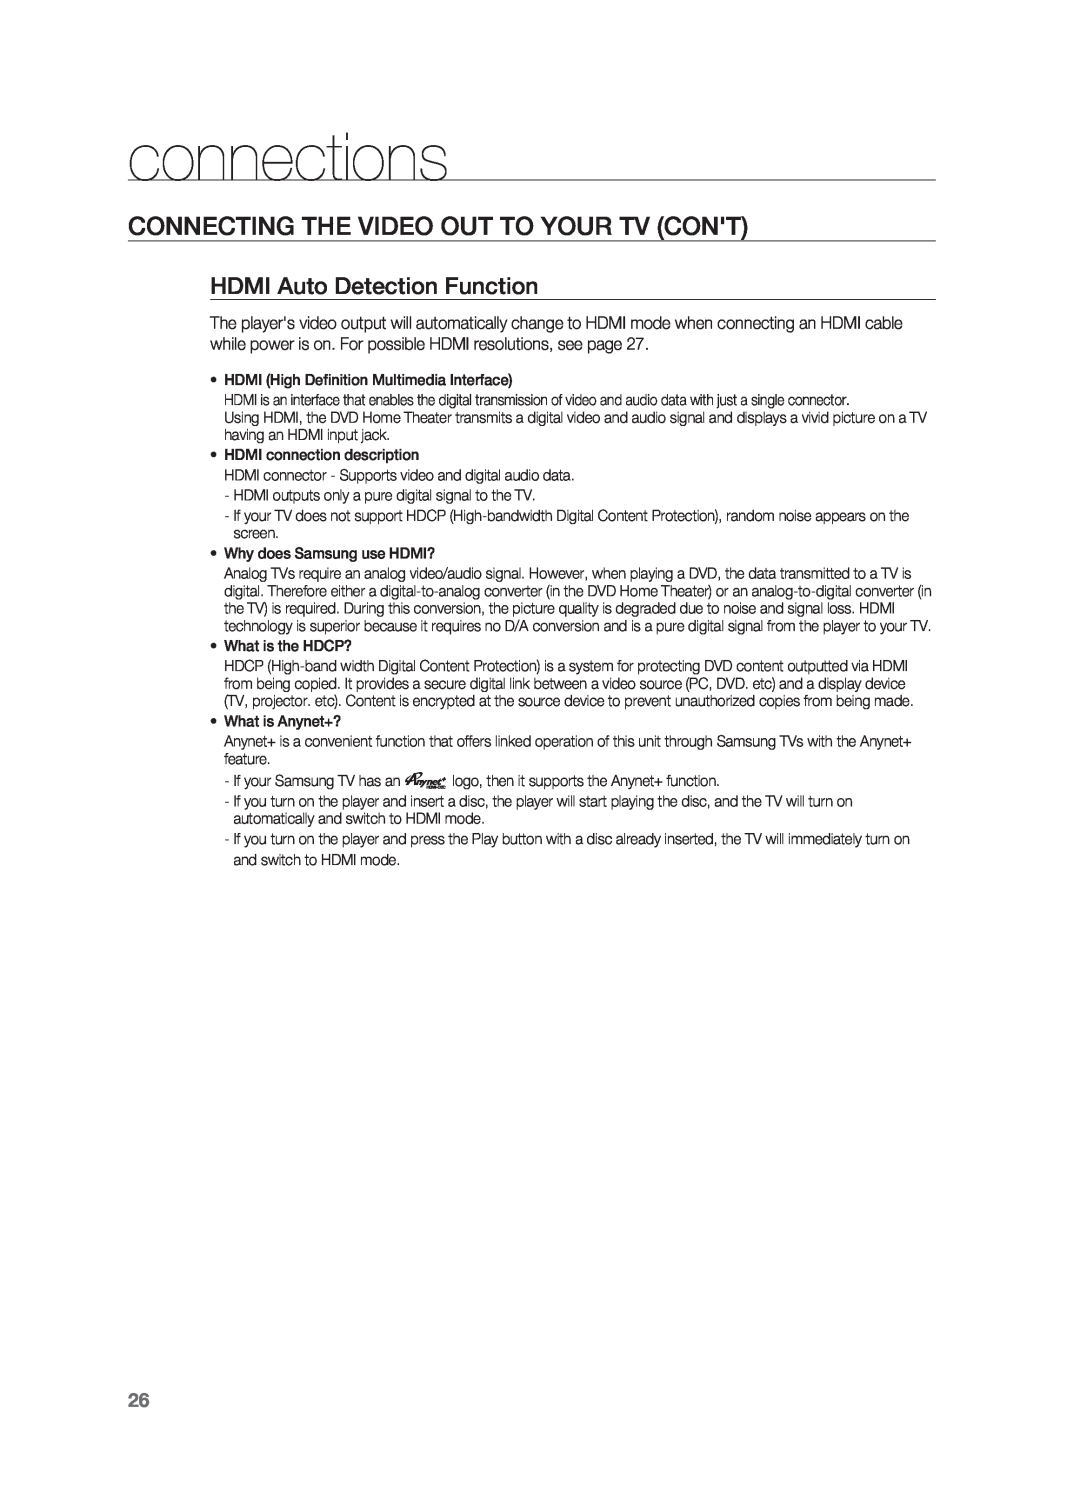 Samsung AH68-02055S manual Connecting the Video Out to your TV CONt, HDMI Auto Detection Function, connections 